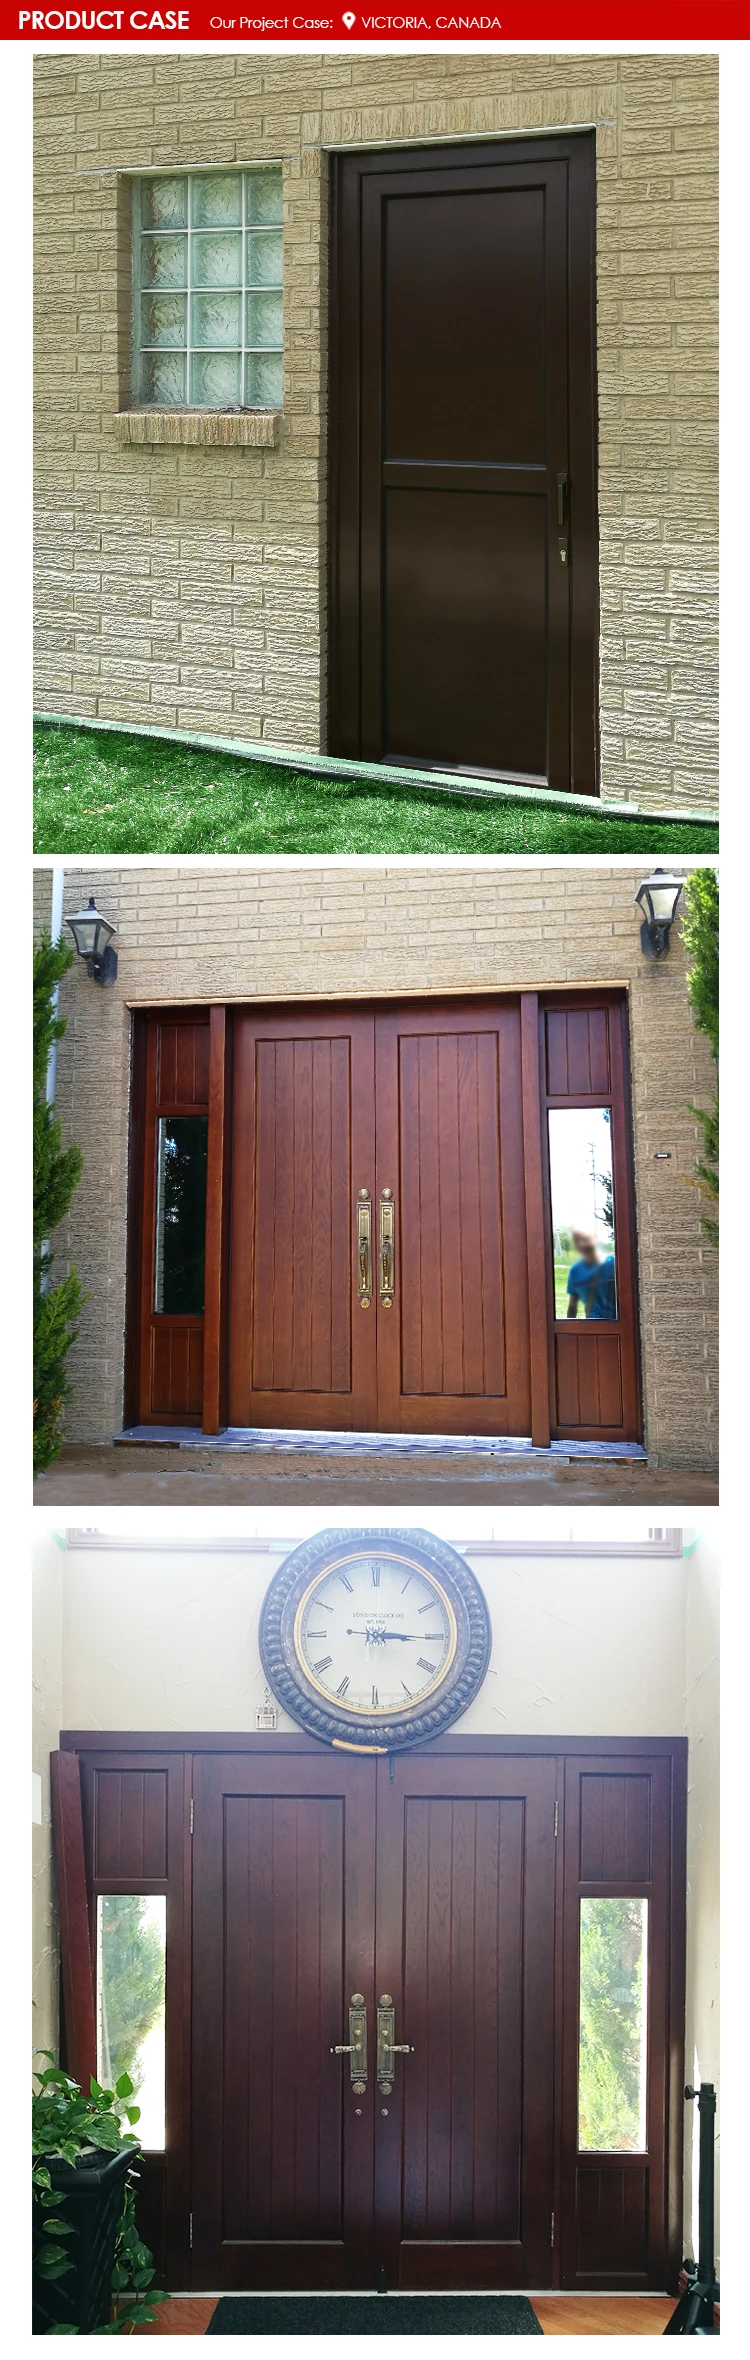 Australian Standards Latest Design Exterior Large Wood Patio Door For Sale For Homes And Commercial Housing